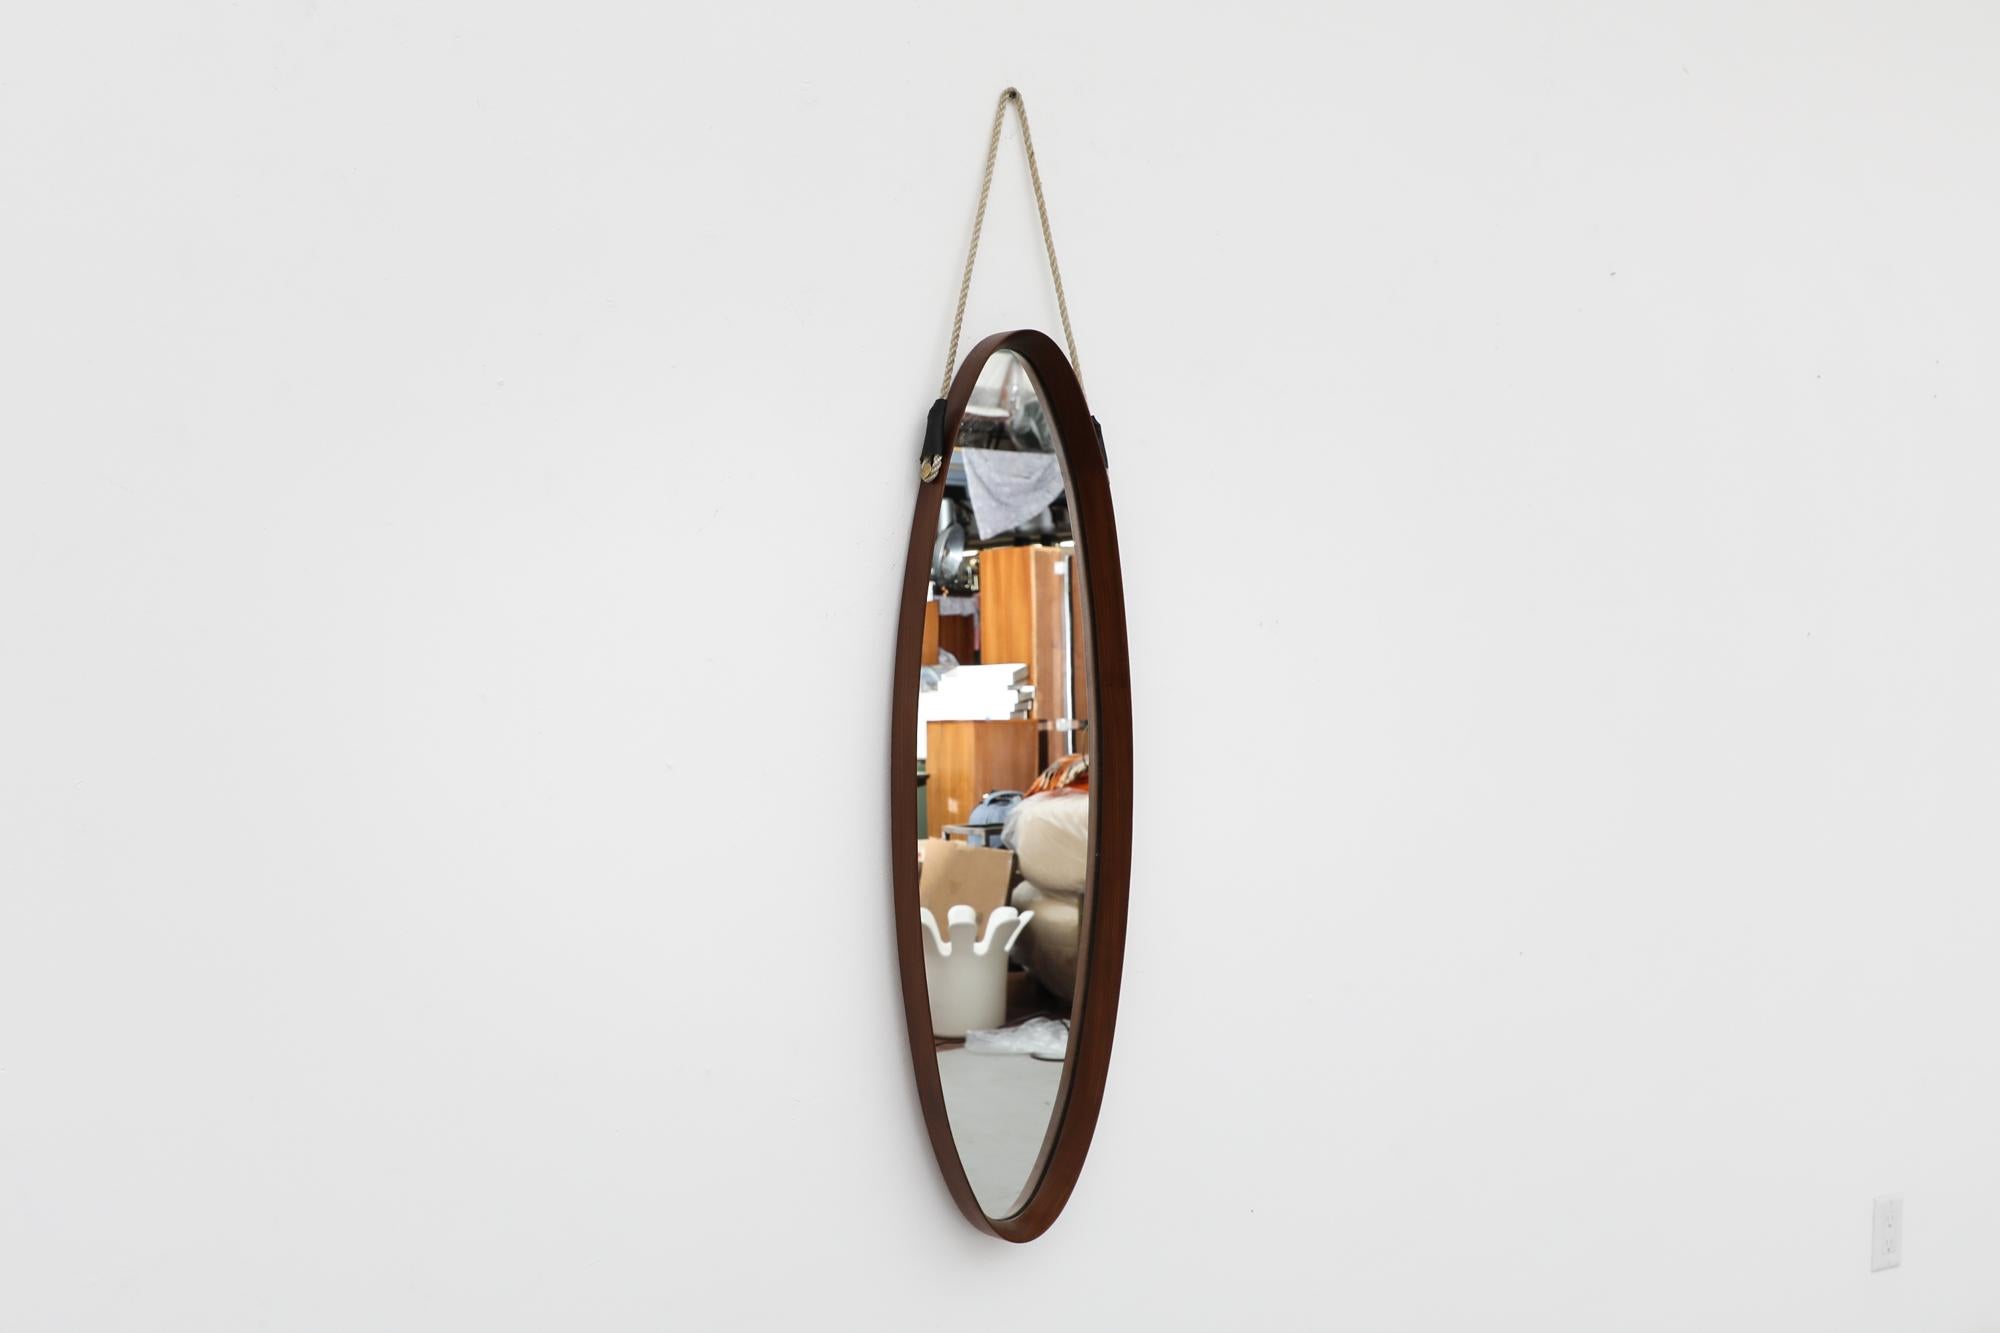 Mid-20th Century Italian Mid-Century Teak Oval Mirror with Rope Strap For Sale